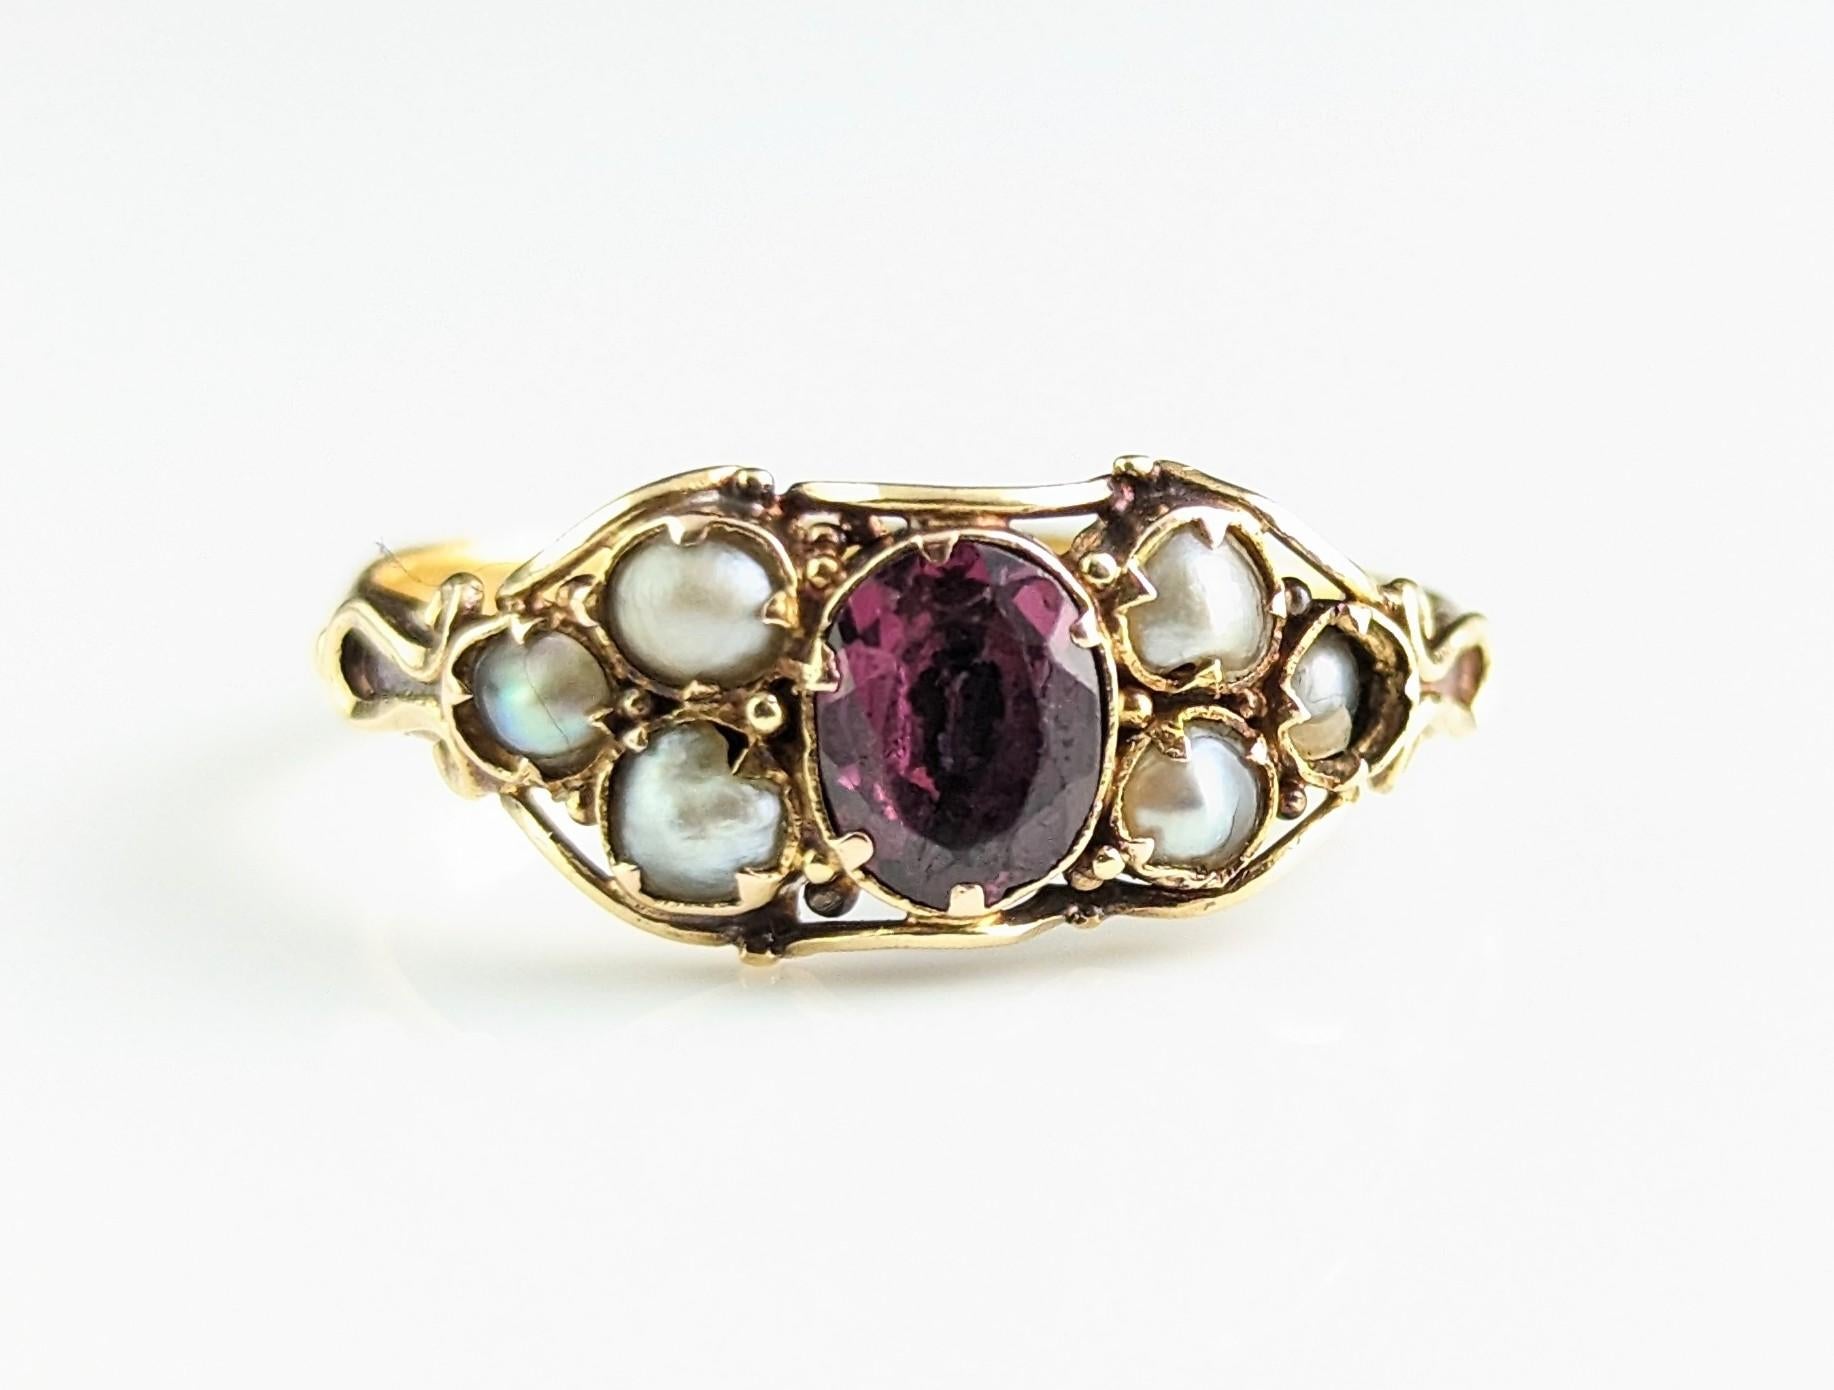 Antique Almandine Garnet and Pearl Ring, 22k Yellow Gold 3